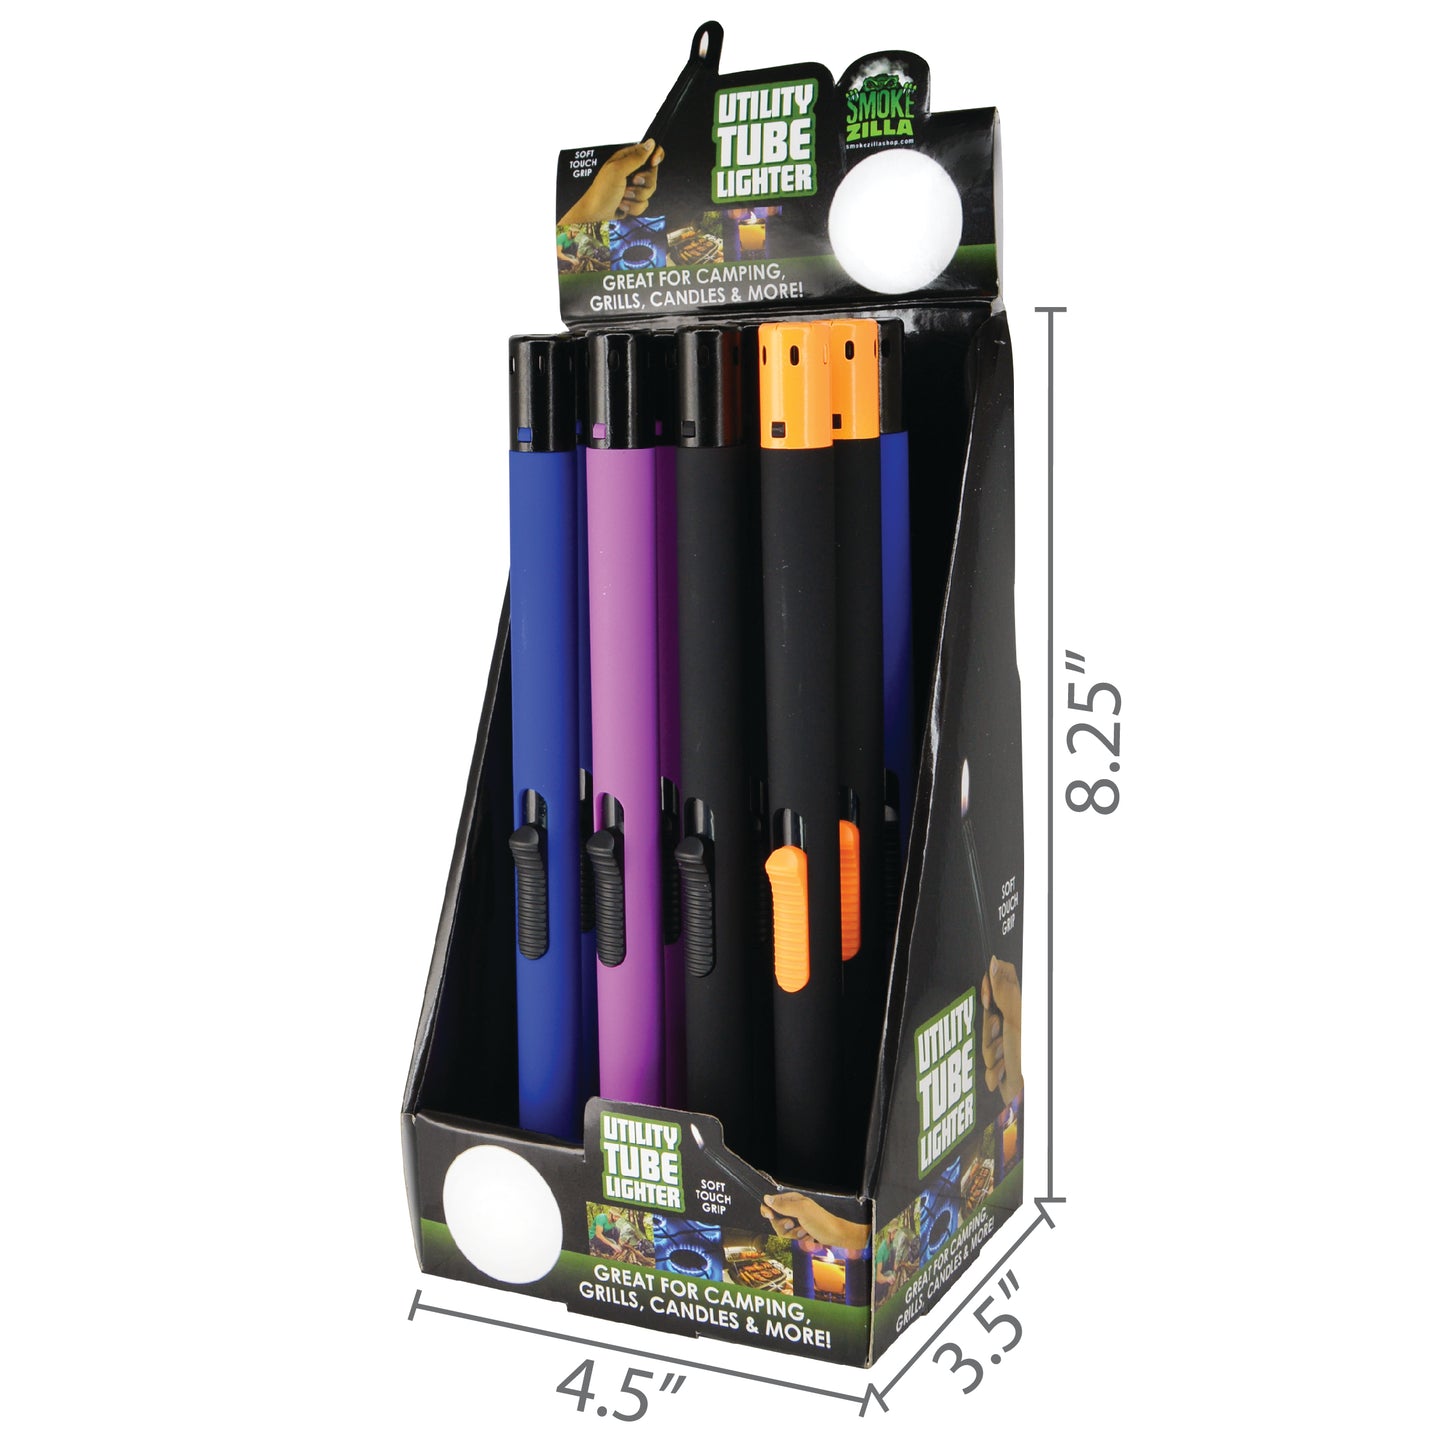 ITEM NUMBER 025969 TUBE UTILITY LIGHTER 12 PIECES PER DISPLAY